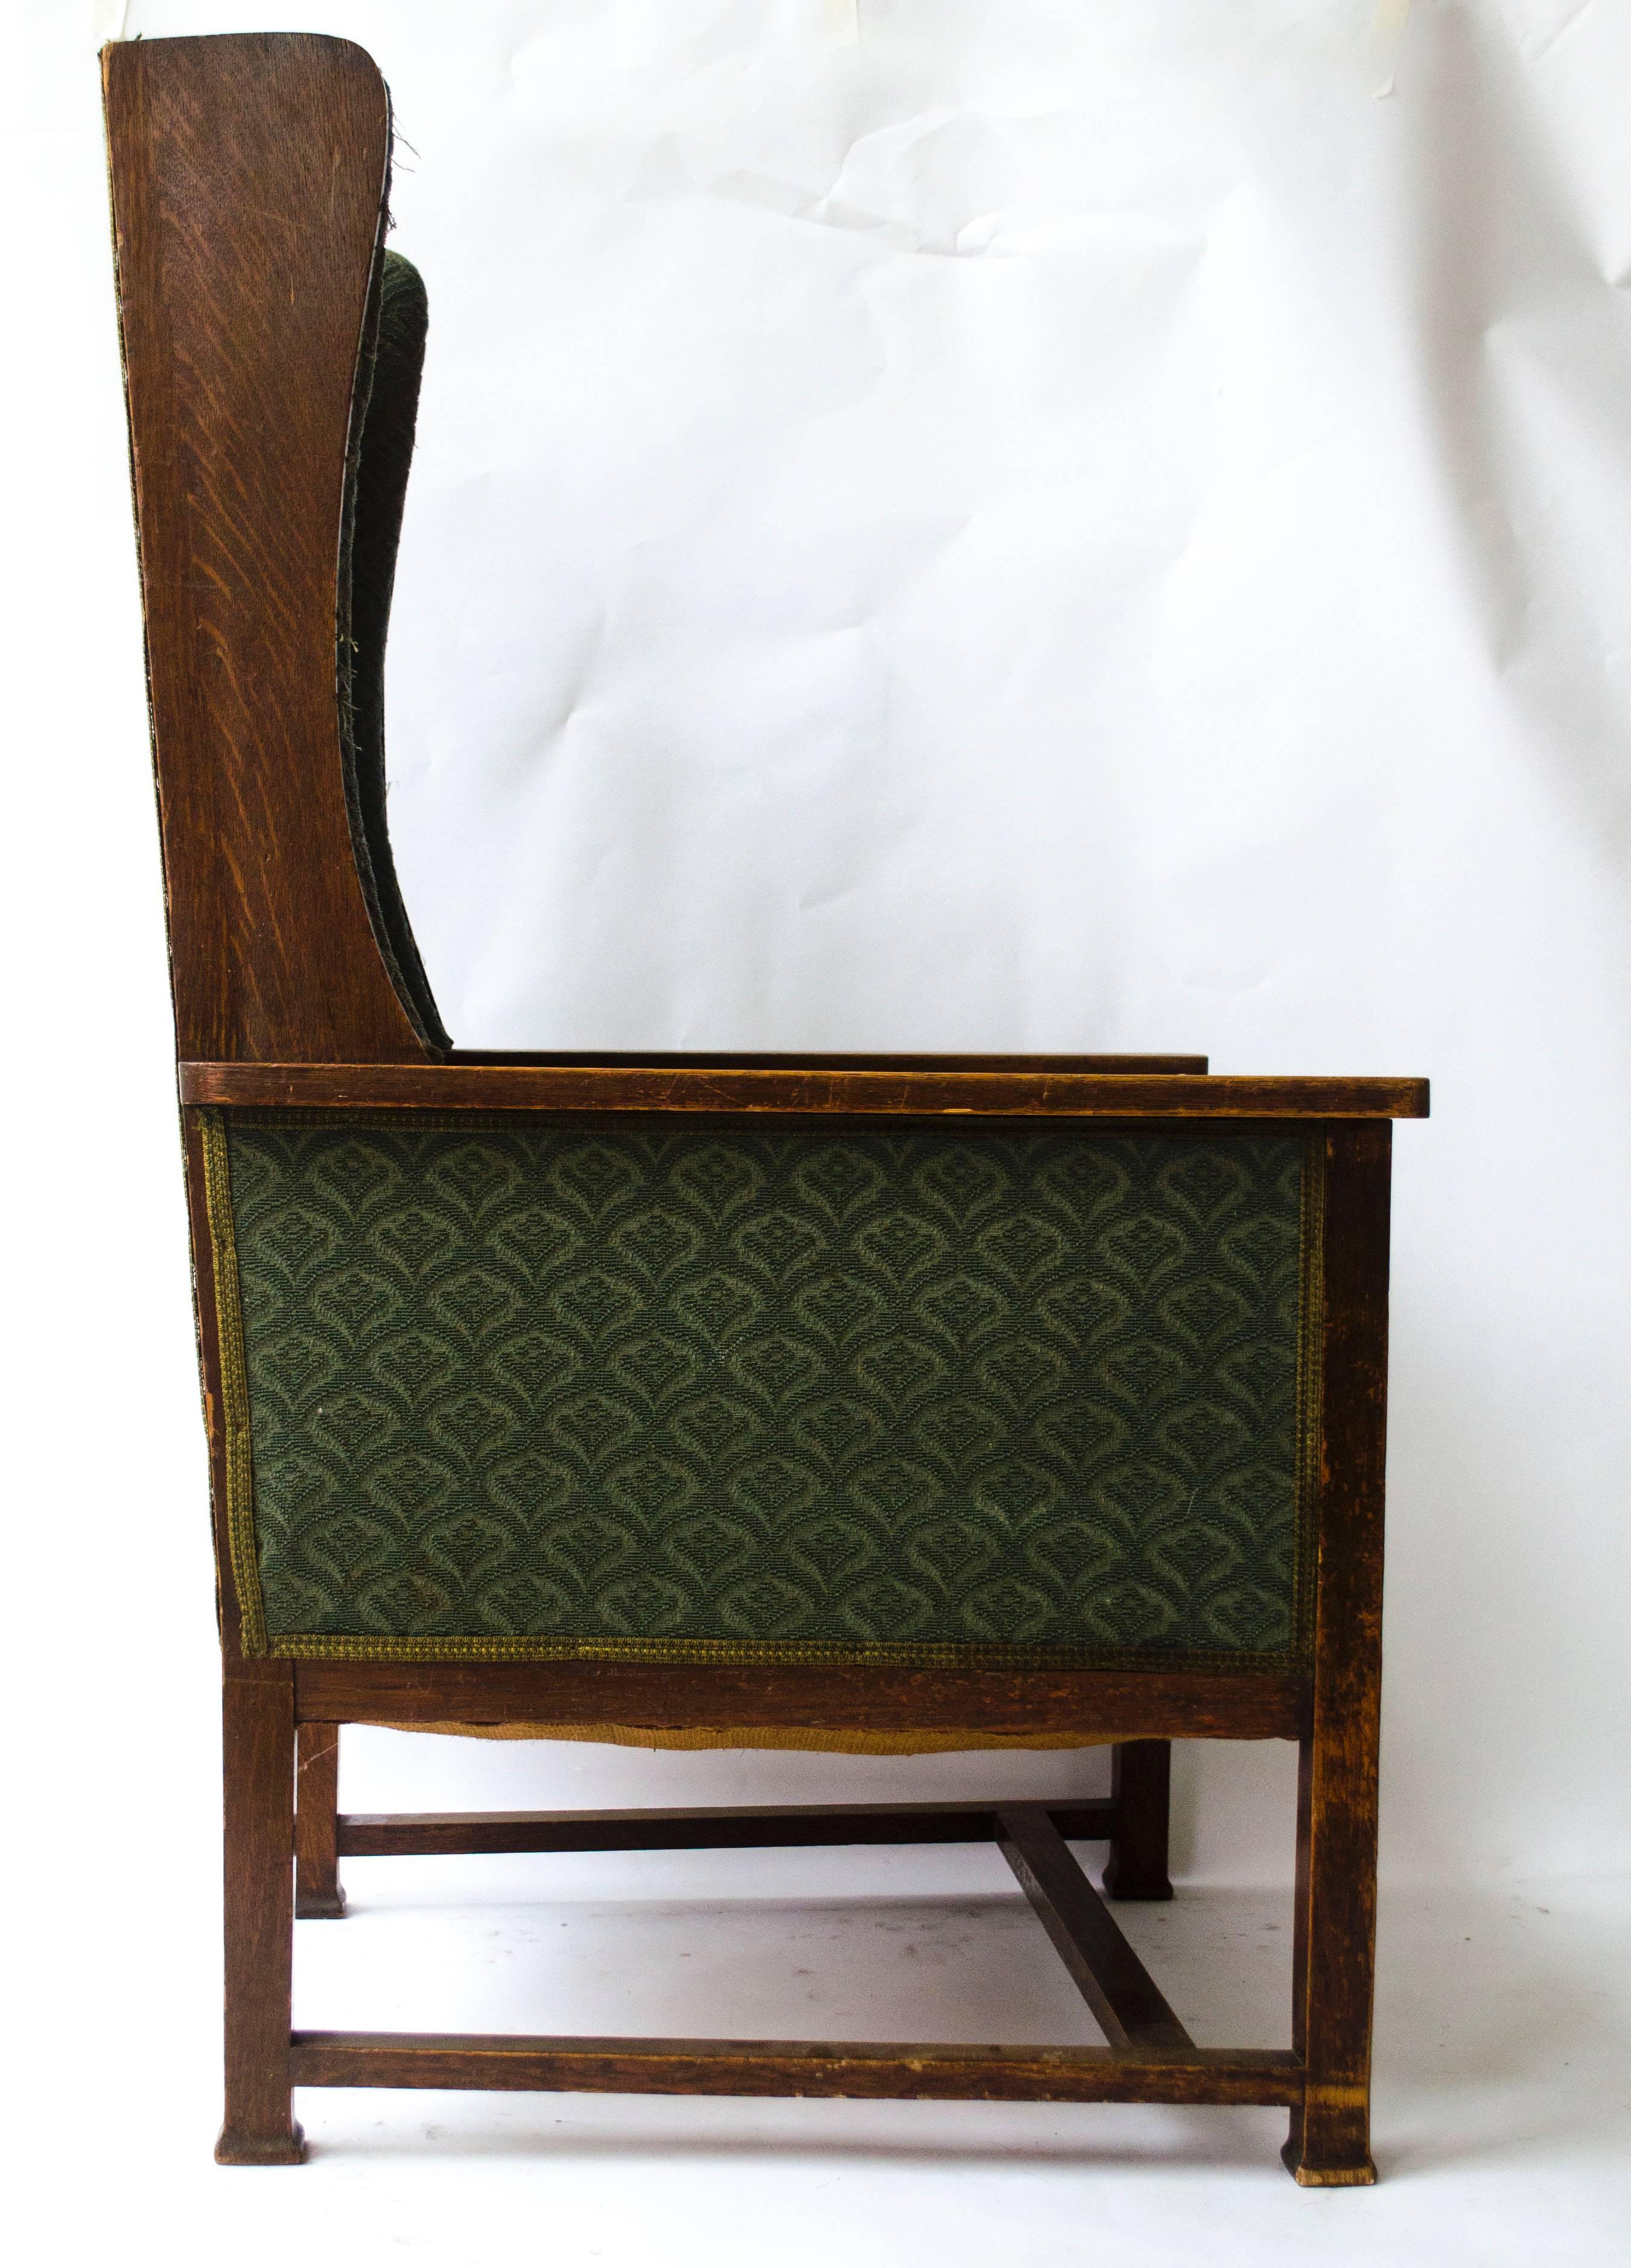 Mackay Hugh Baillie Scott (1865-1945), An oak high back wing lounge chair, the arm supports with chequer inlay panels, on square shaped feet. 
There are two armchairs identical to this one by M. H. Baillie Scott shown in 'Houses and Gardens', p. 298